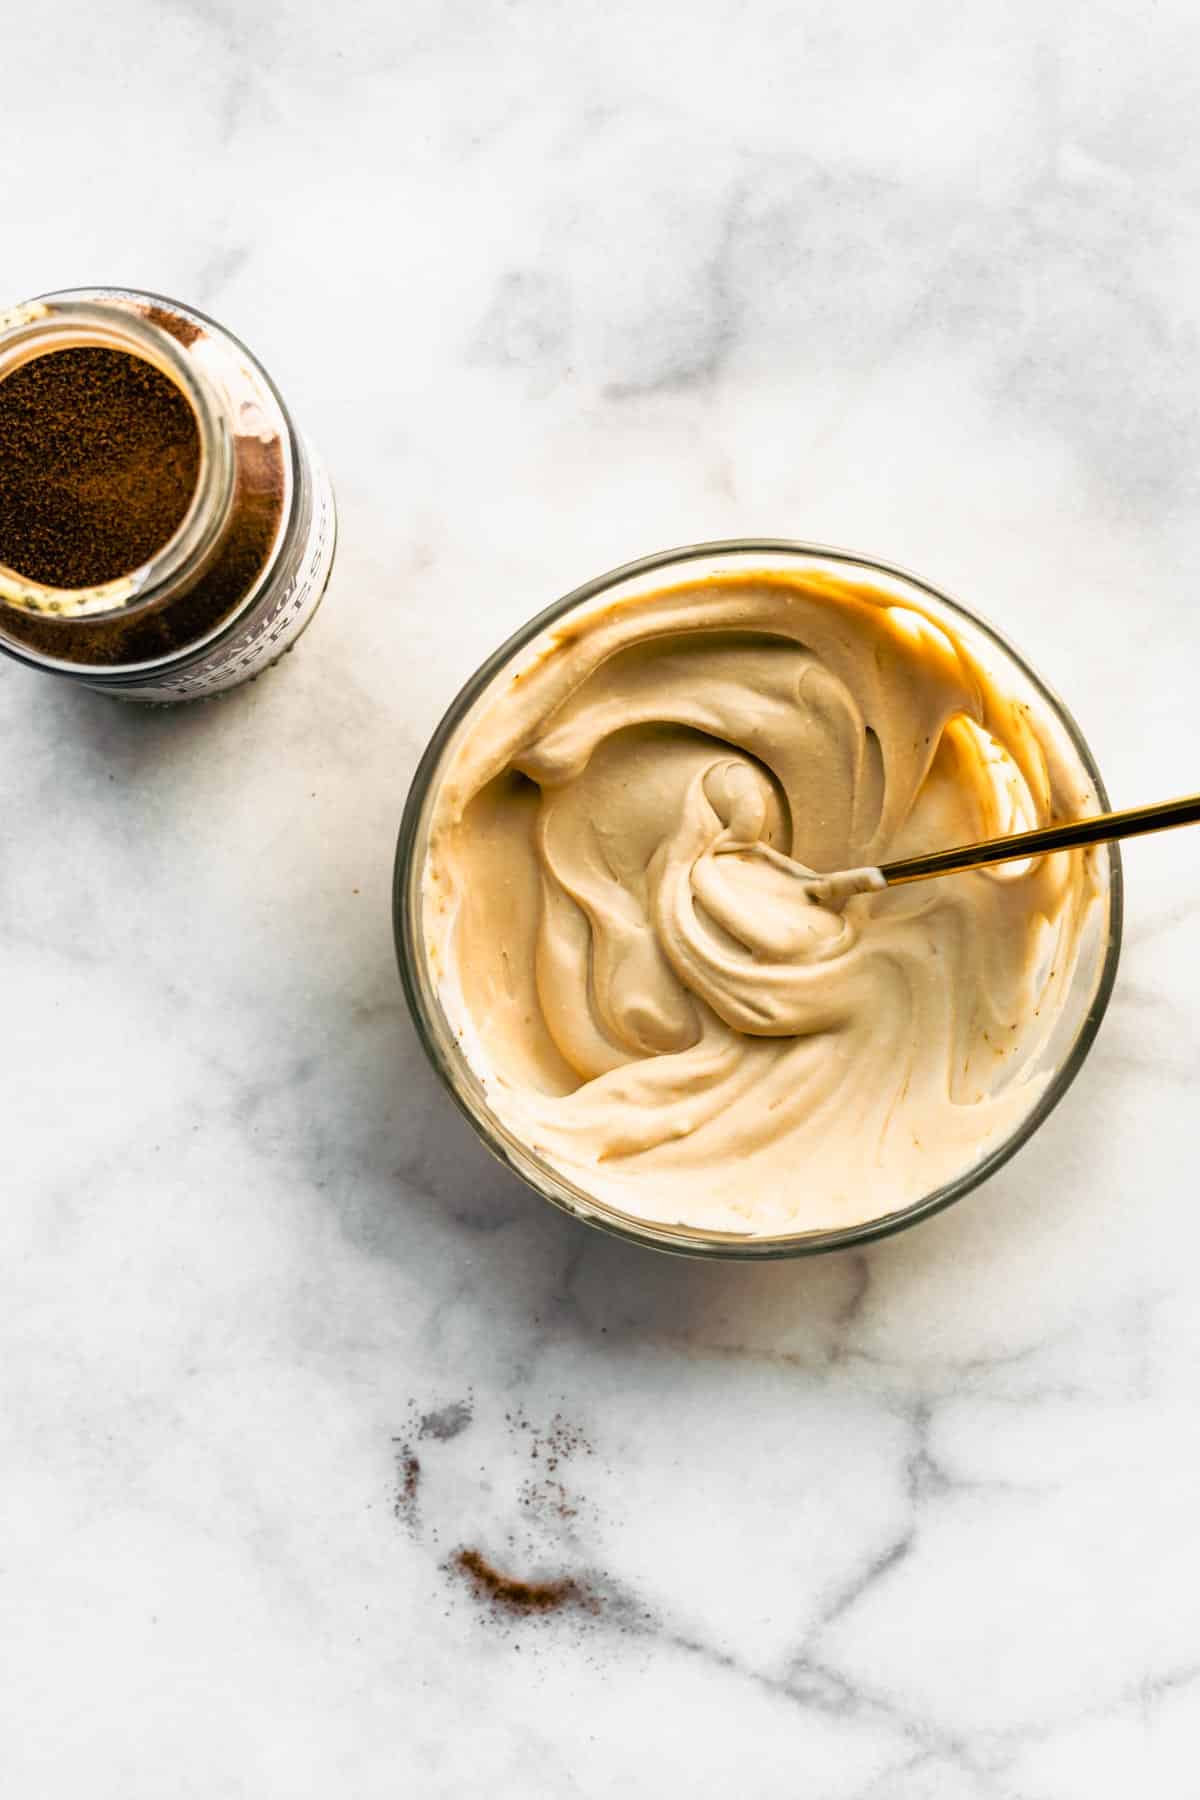 Whipped cream mixed with instant coffee to make instant coffee whipped cream.